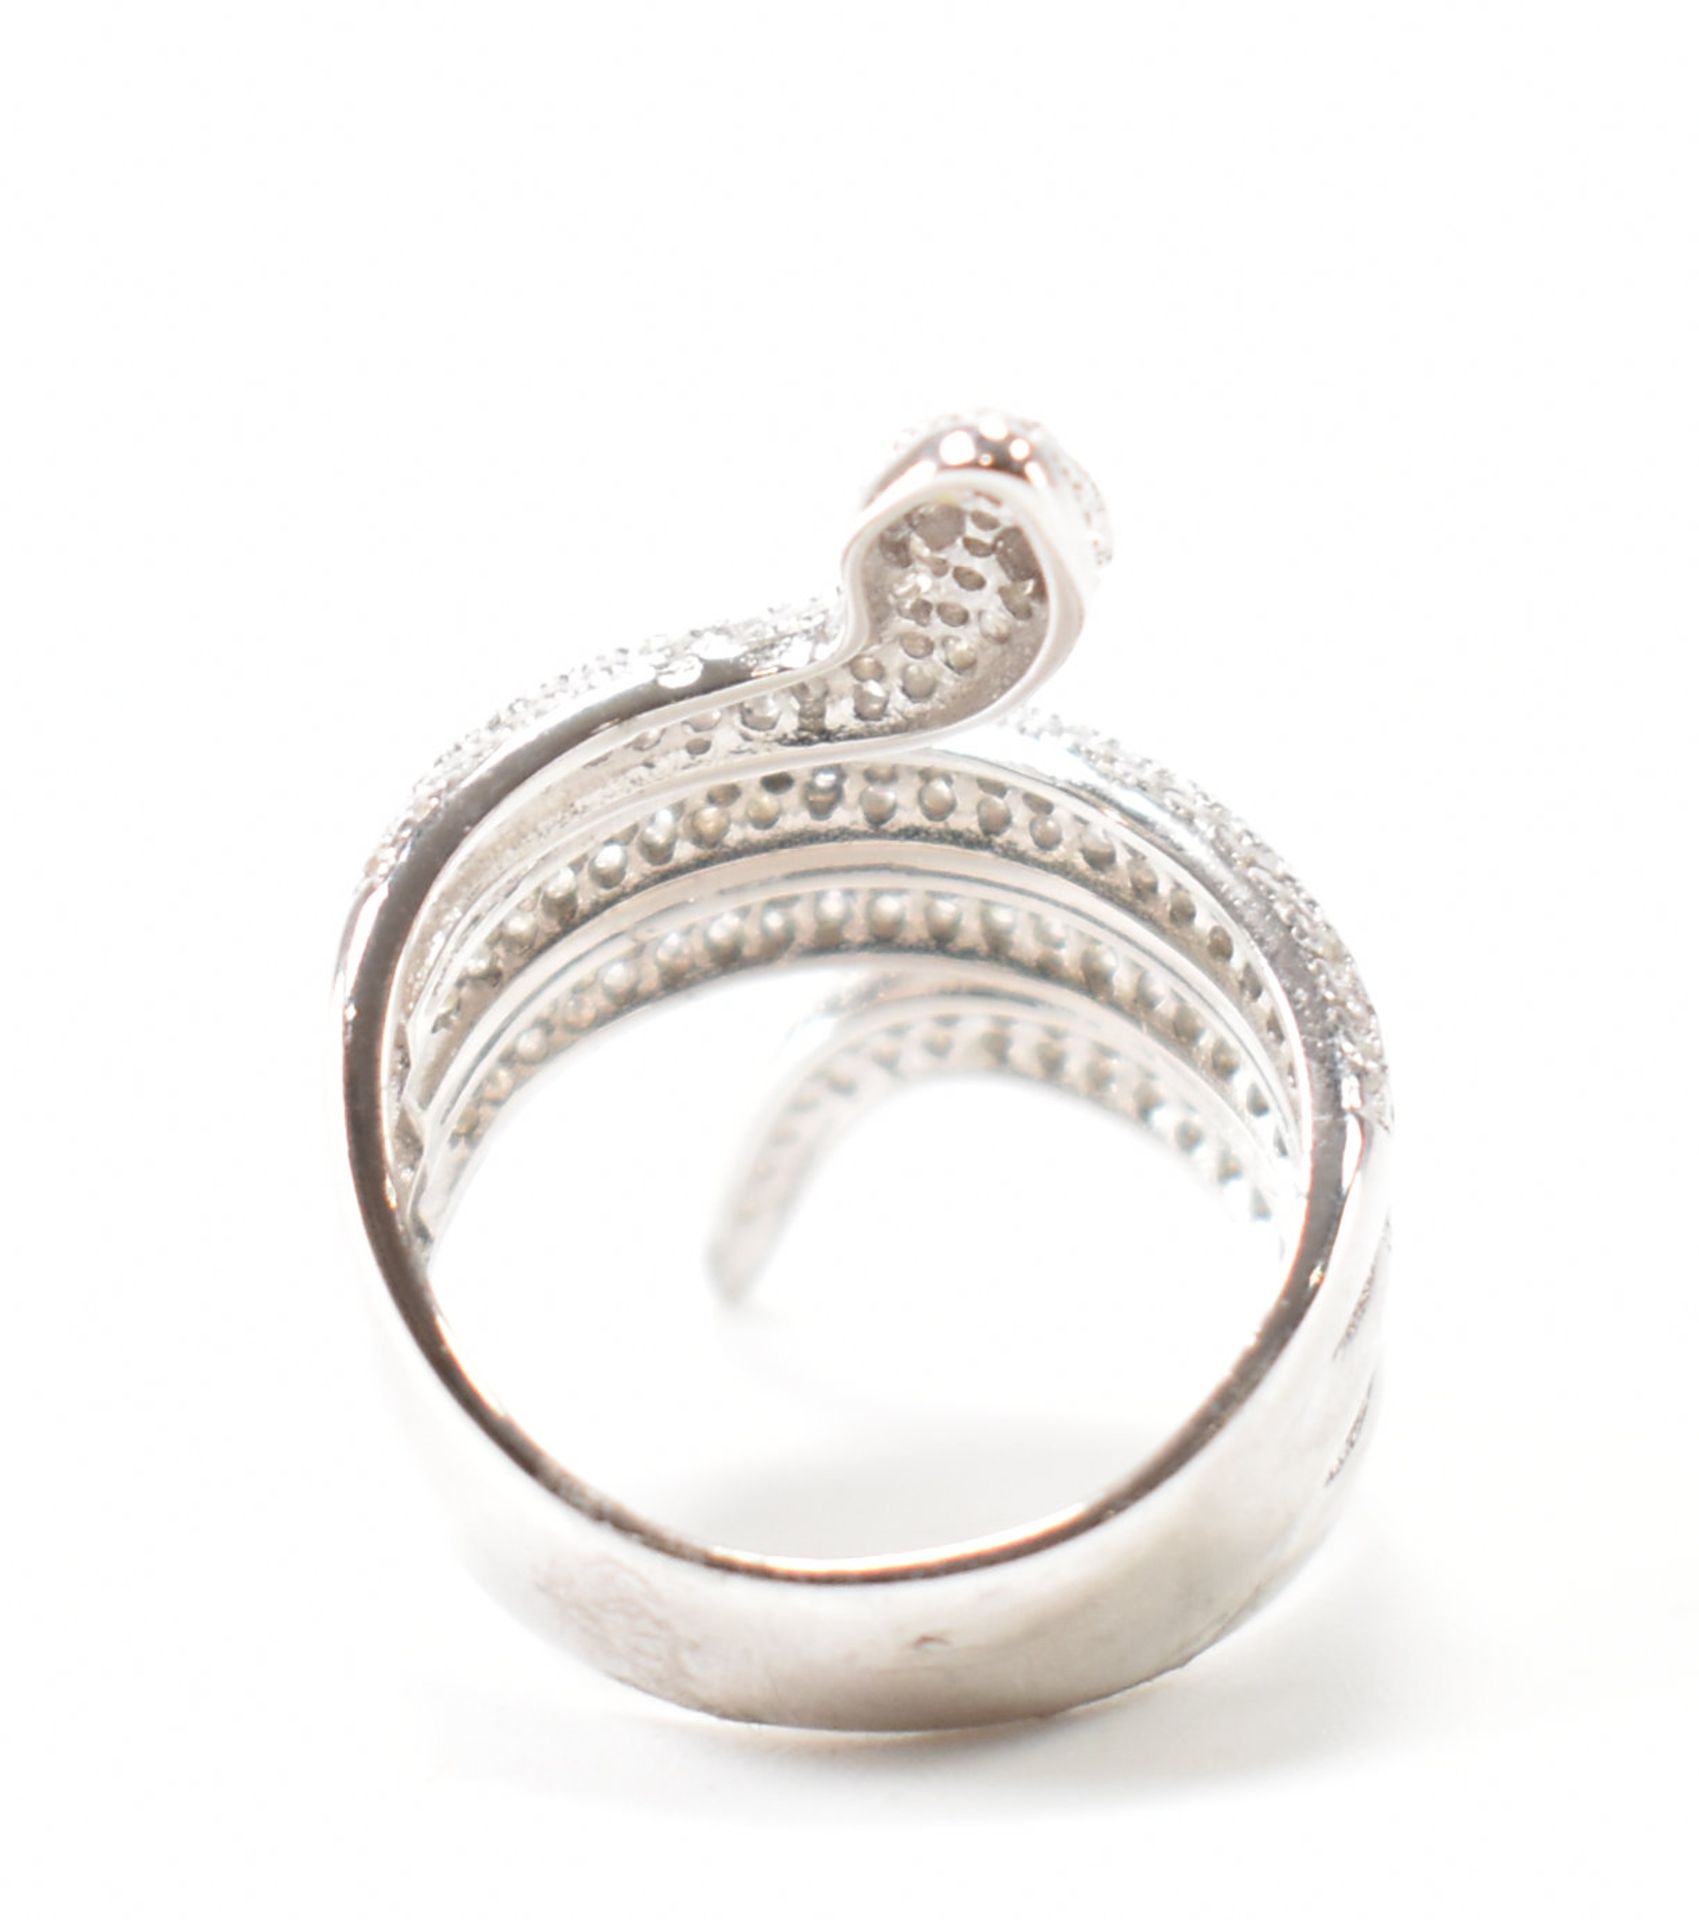 925 SILVER COILED SERPENT RING - Image 3 of 8